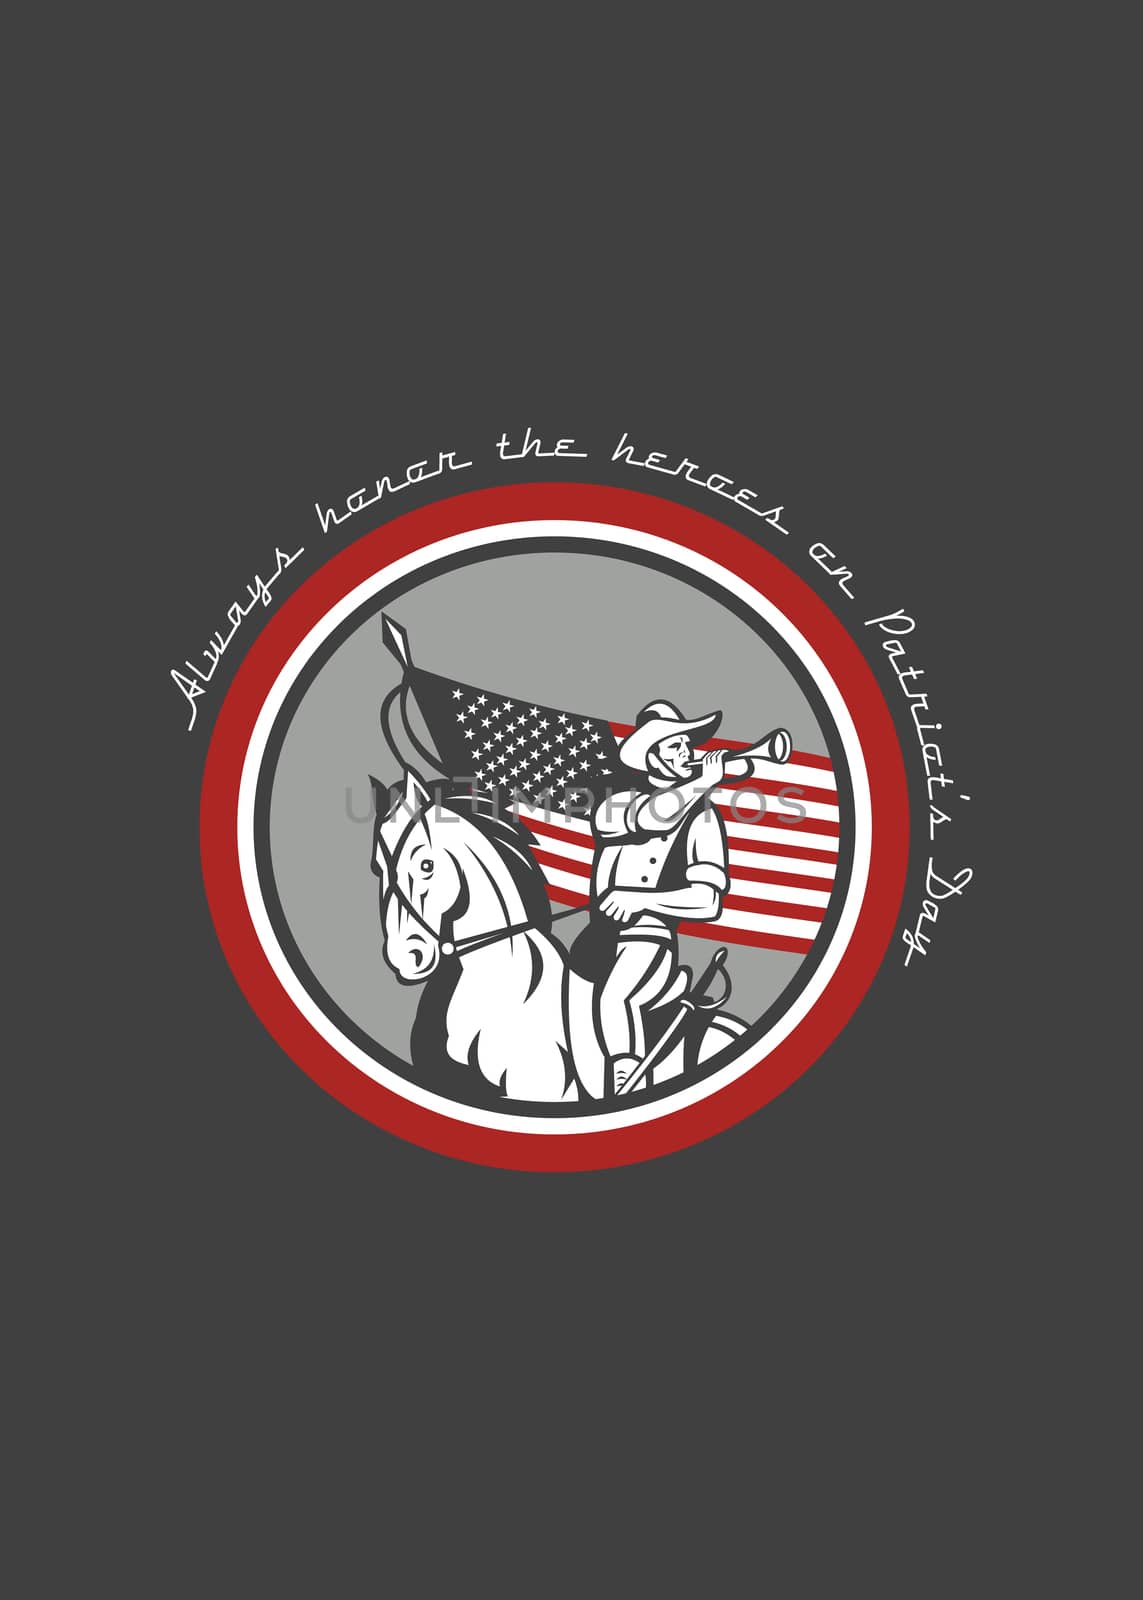 Patriots Day�greeting card featuring an illustration of an American cavalry soldier riding horse blowing a bugle looking to the side set inside circle with USA stars and stripes flag in background done in retro style and the words Always Honor the Heroes on Patriot's Day